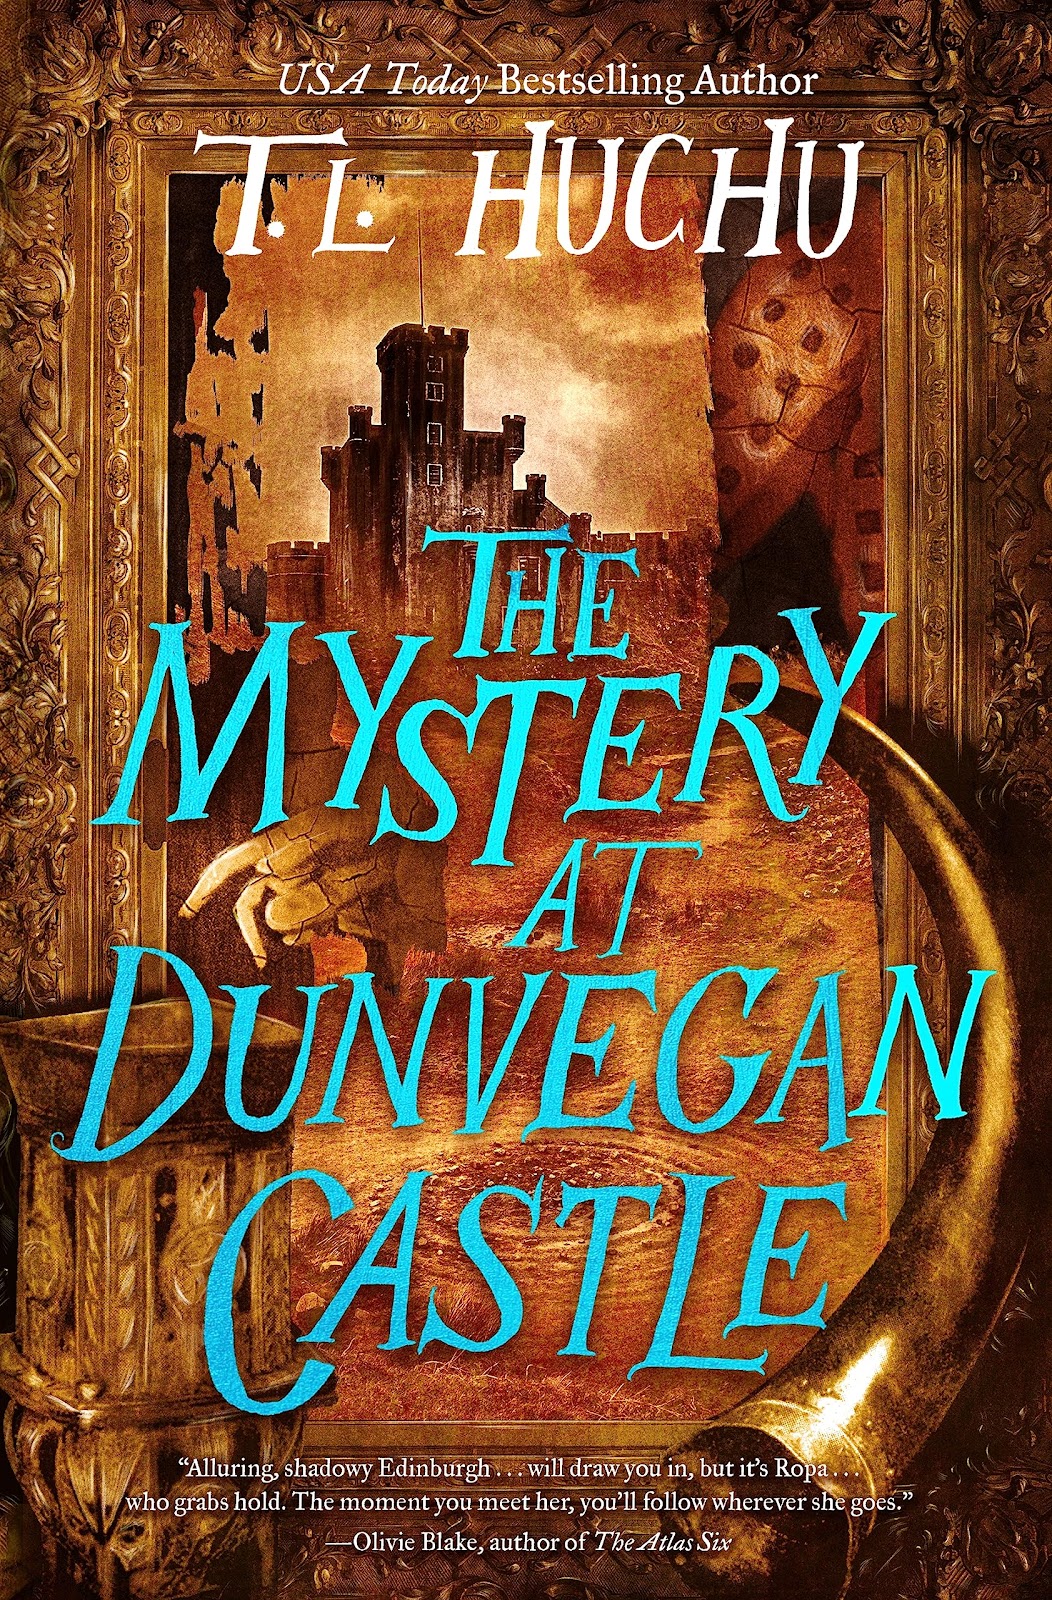 The Mystery at Dunvegan Castle by T. L. Huchu